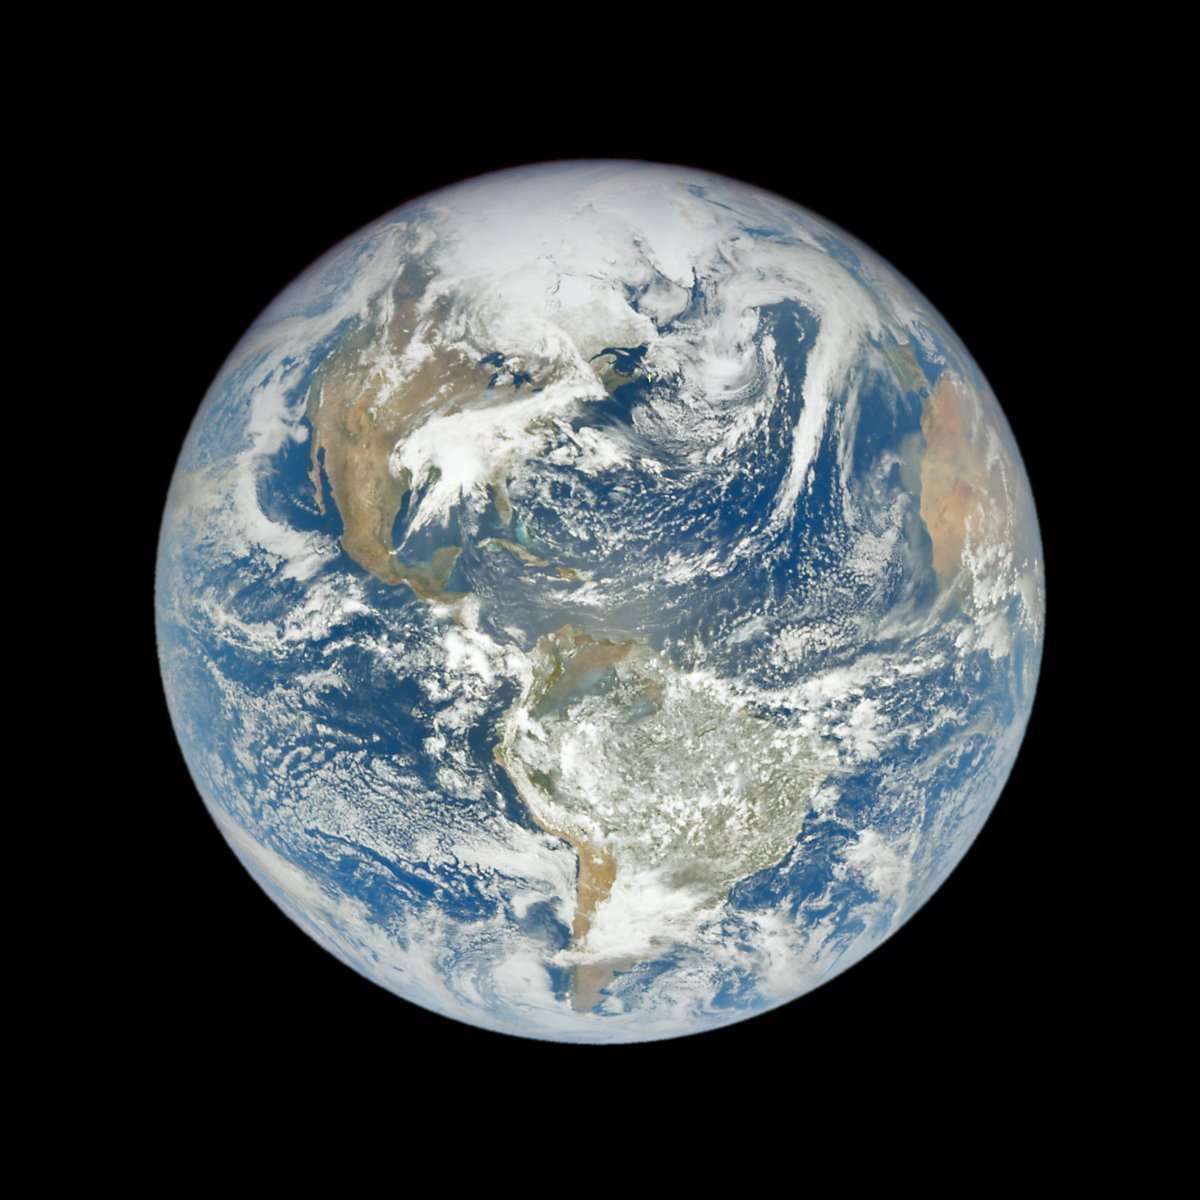 16:25 on Wednesday April 10th, over the Caribbean Sea